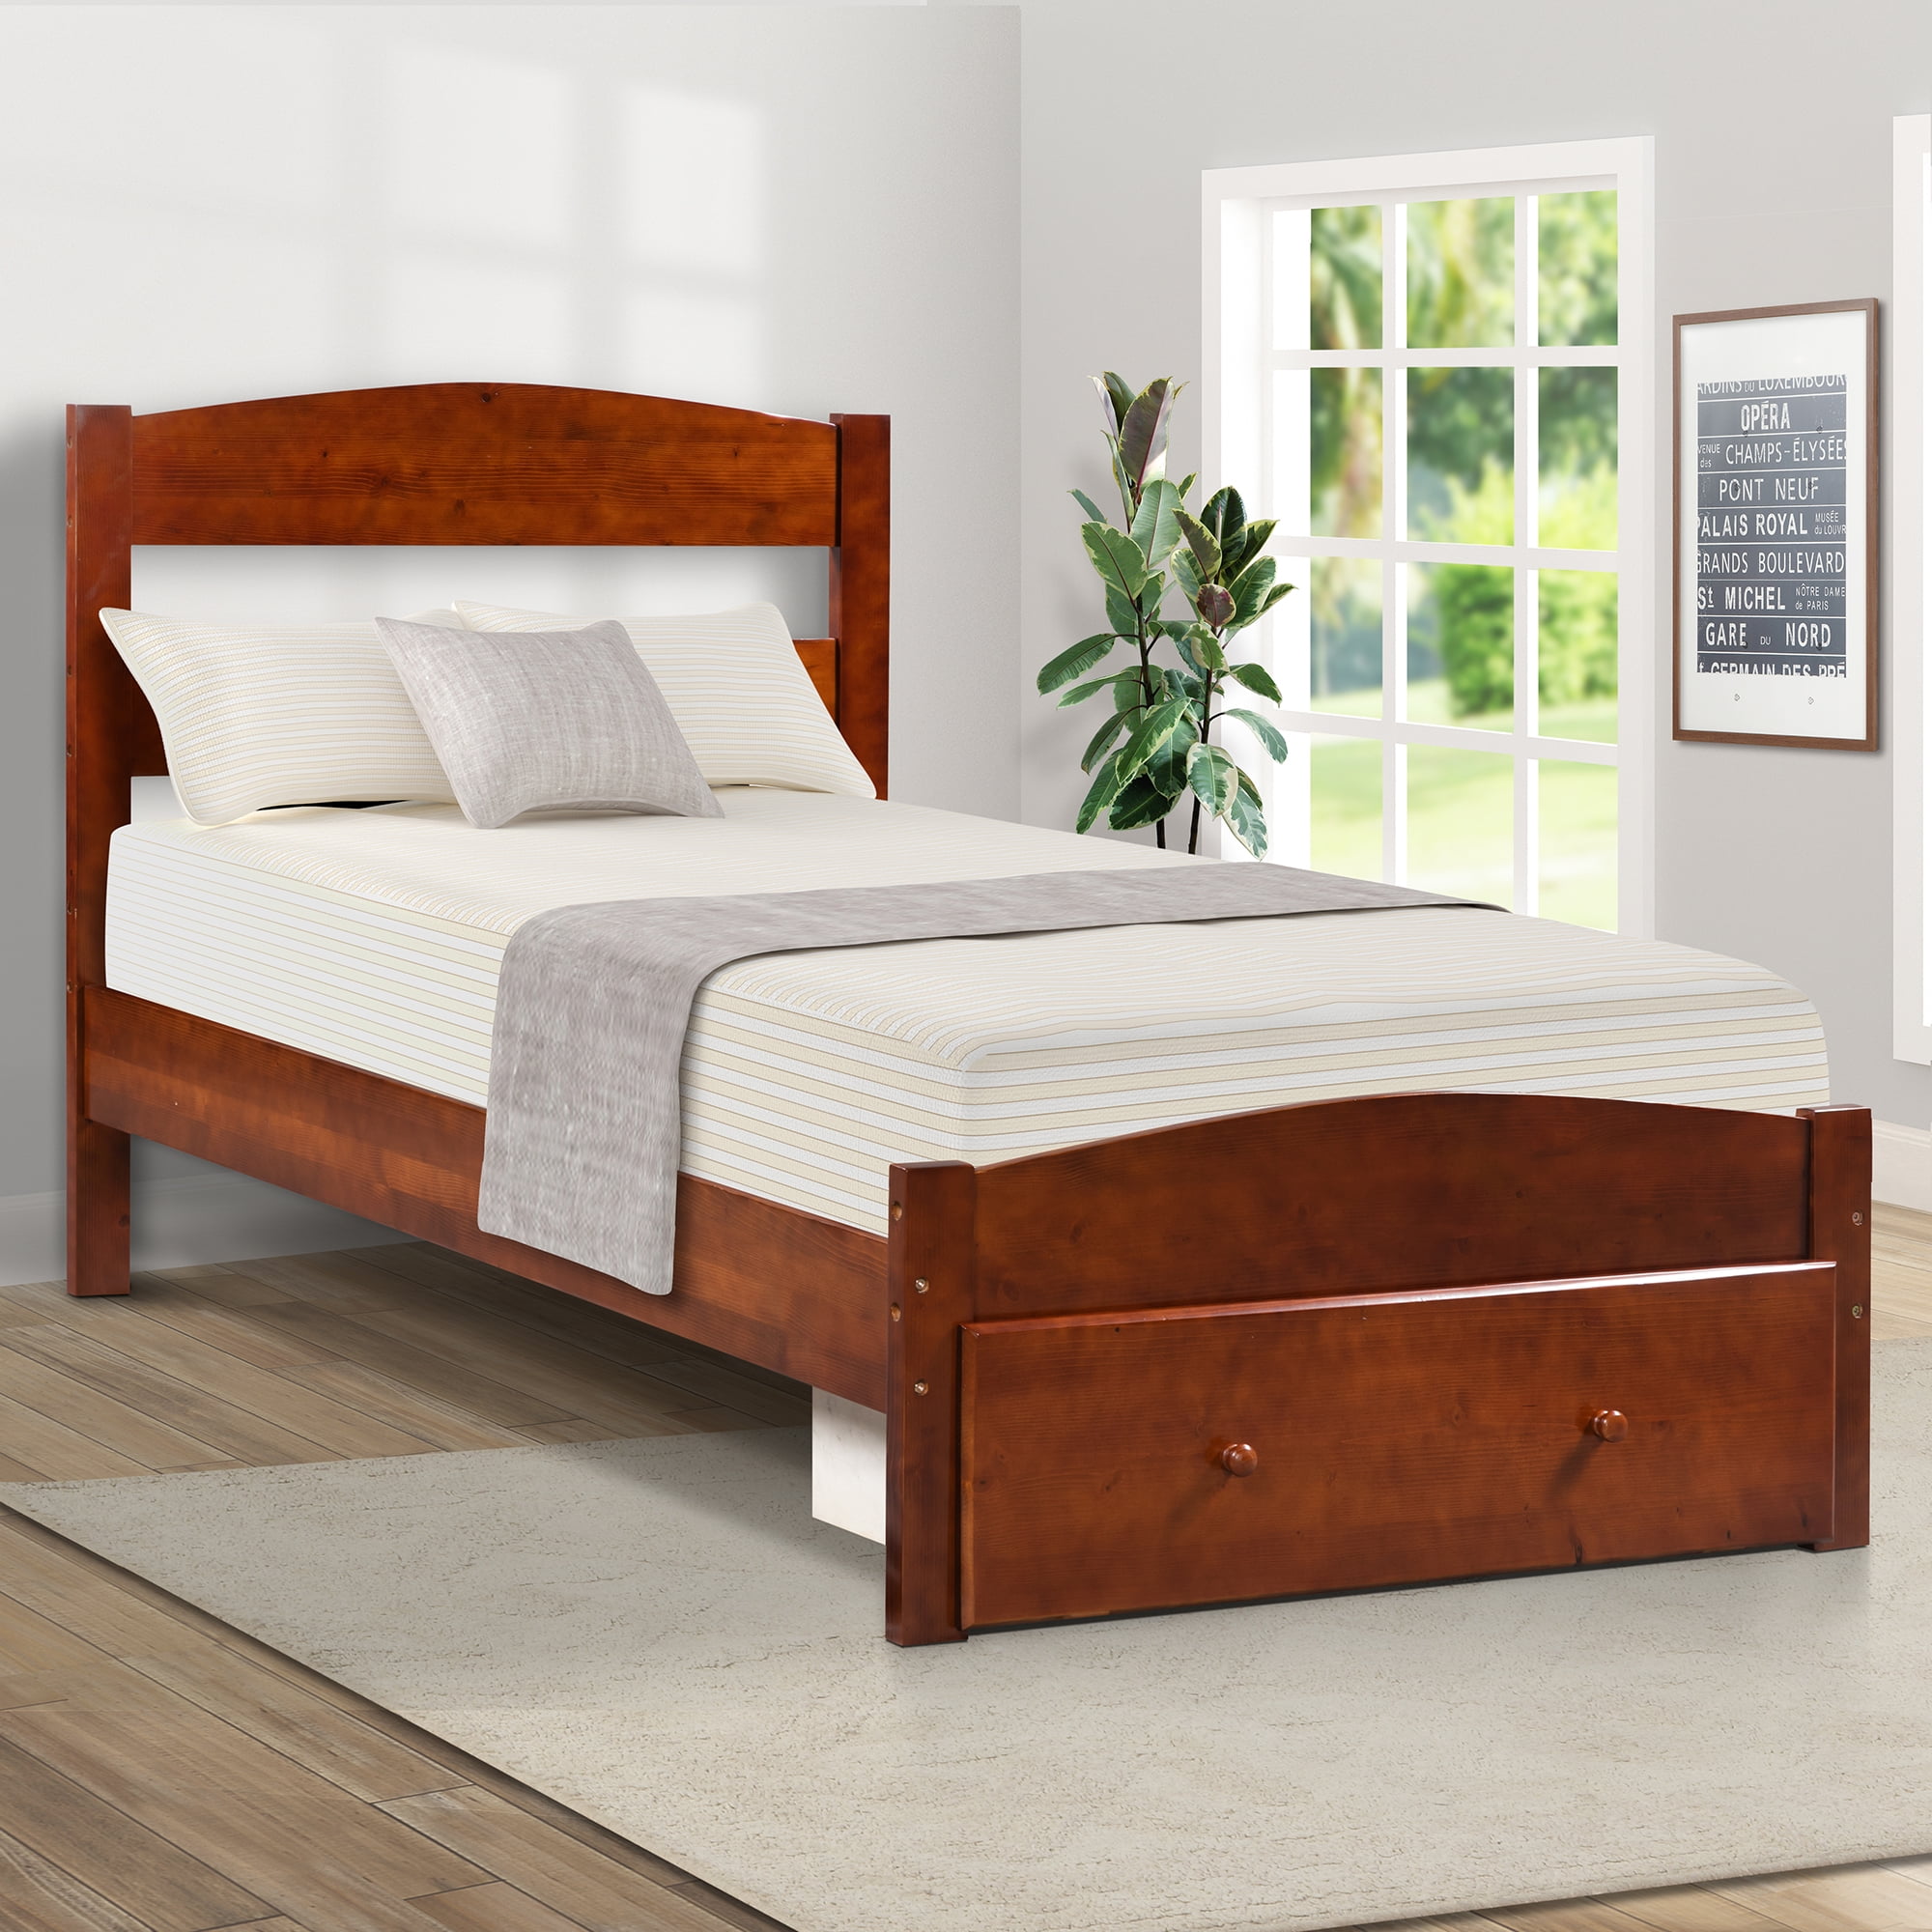 Platform Bed Frame with Headboard and Footboard, Classic Pine Wood Twin